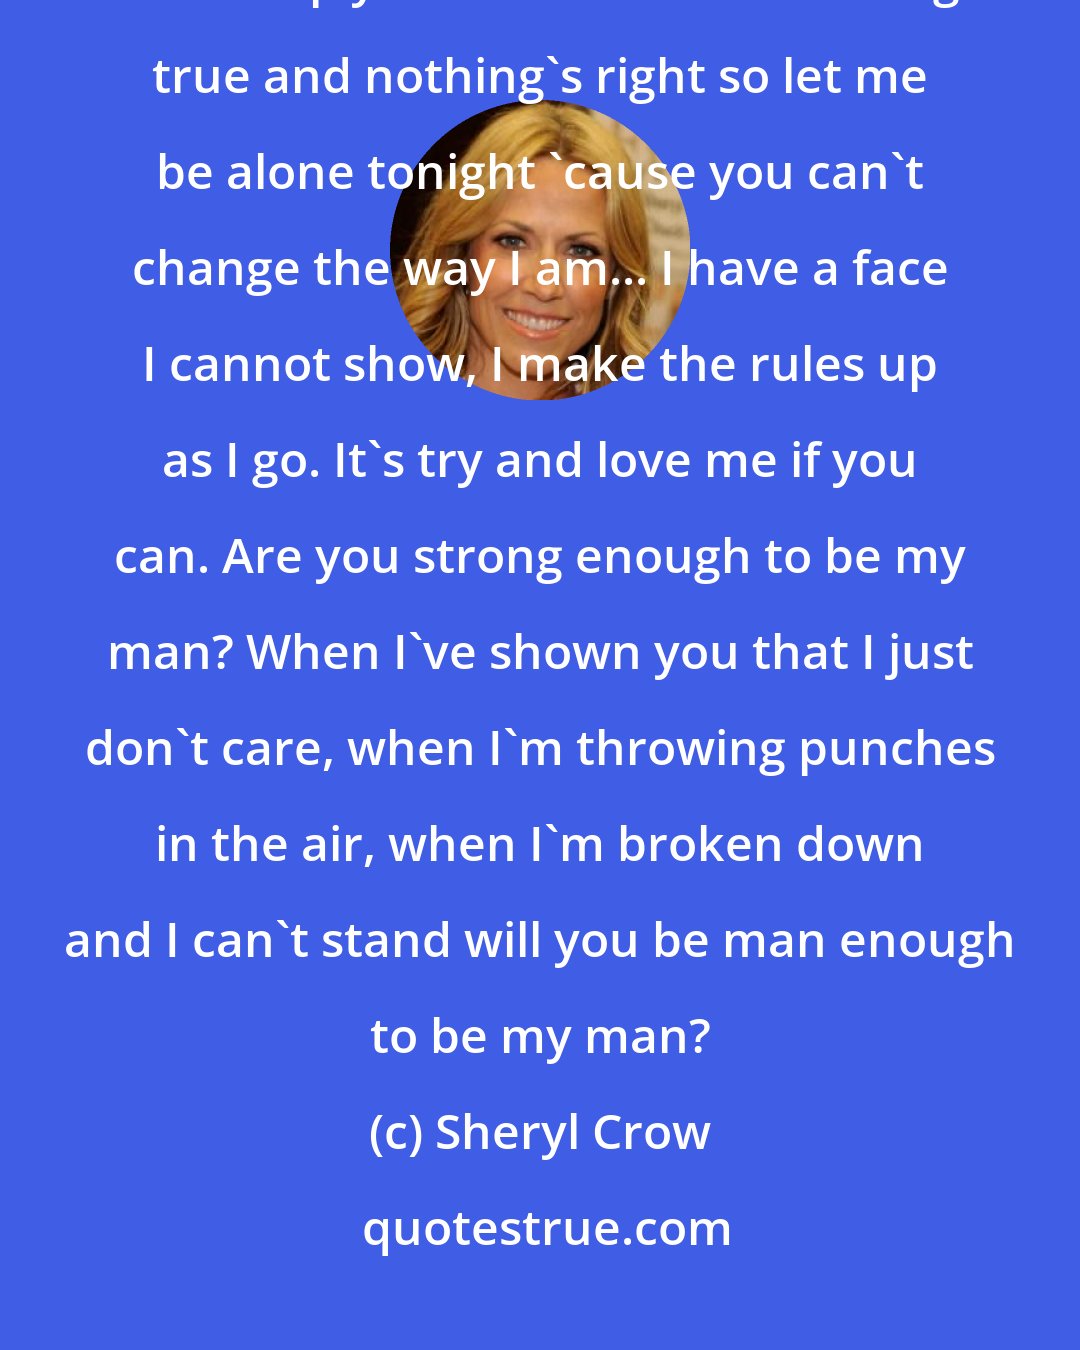 Sheryl Crow: God, I feel like hell tonight. Tears of rage I cannot fight. I'd be the last to help you understand... Nothing's true and nothing's right so let me be alone tonight 'cause you can't change the way I am... I have a face I cannot show, I make the rules up as I go. It's try and love me if you can. Are you strong enough to be my man? When I've shown you that I just don't care, when I'm throwing punches in the air, when I'm broken down and I can't stand will you be man enough to be my man?